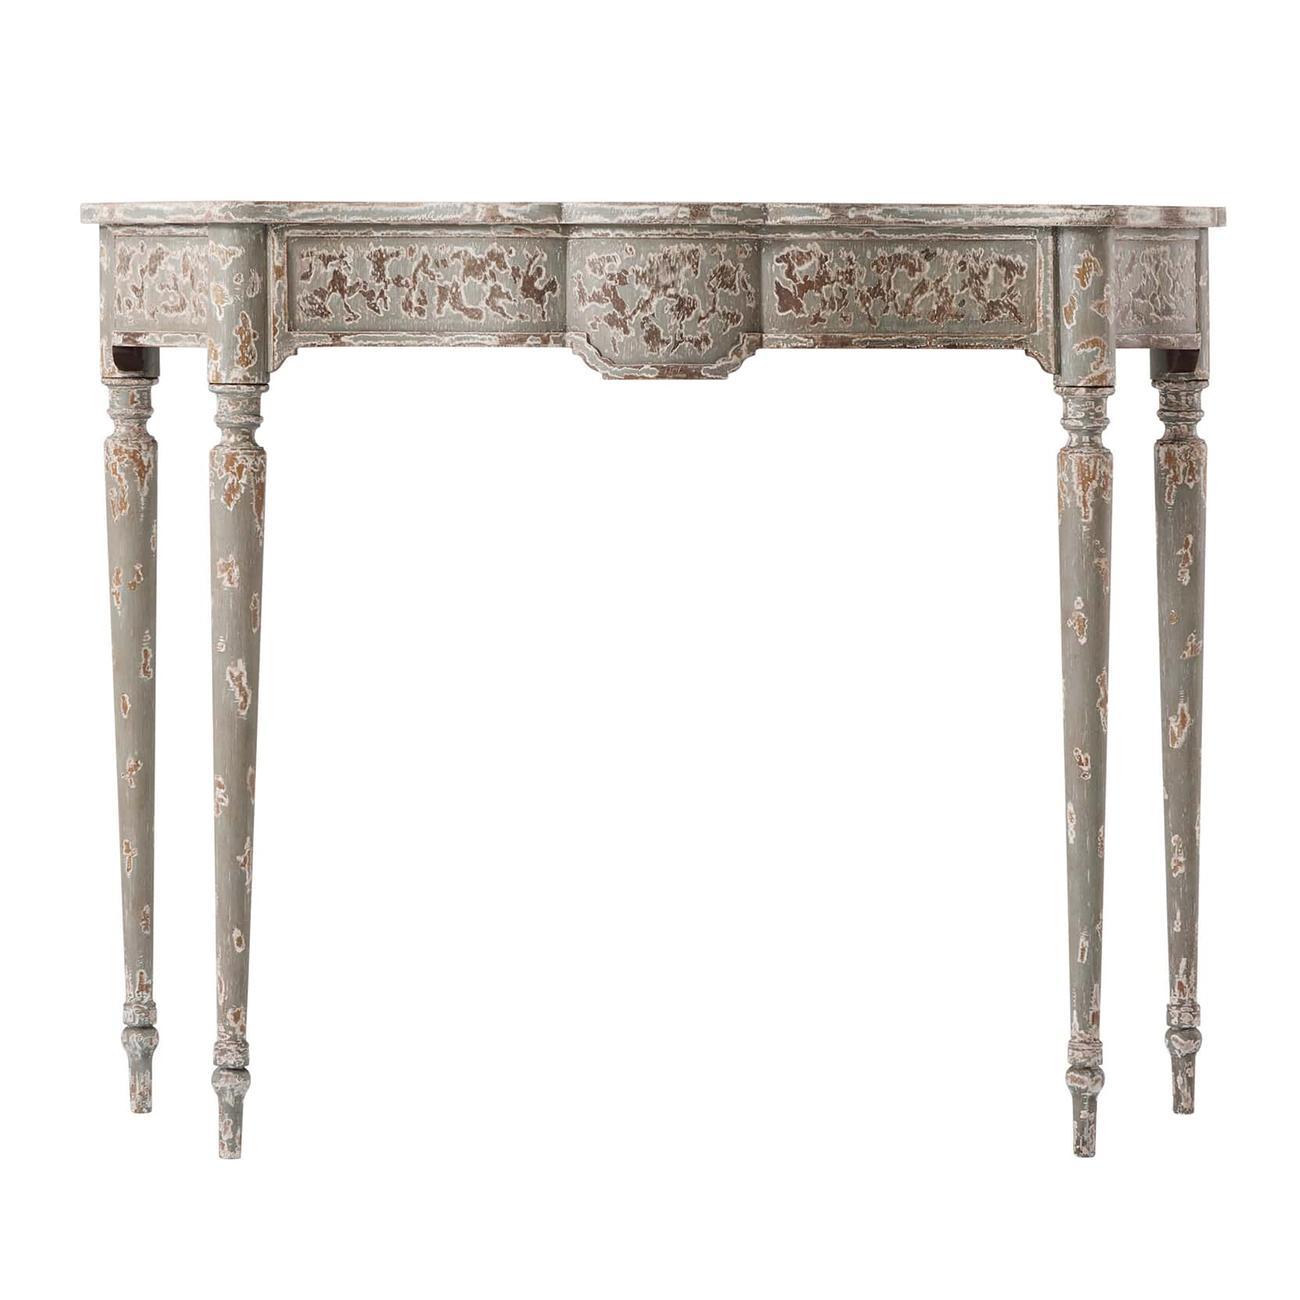 Rustic Provincial style painted and highly distressed serpentine form console tables with a shaped front and sides and raised on turned and tapered legs.
Dimensions: 43